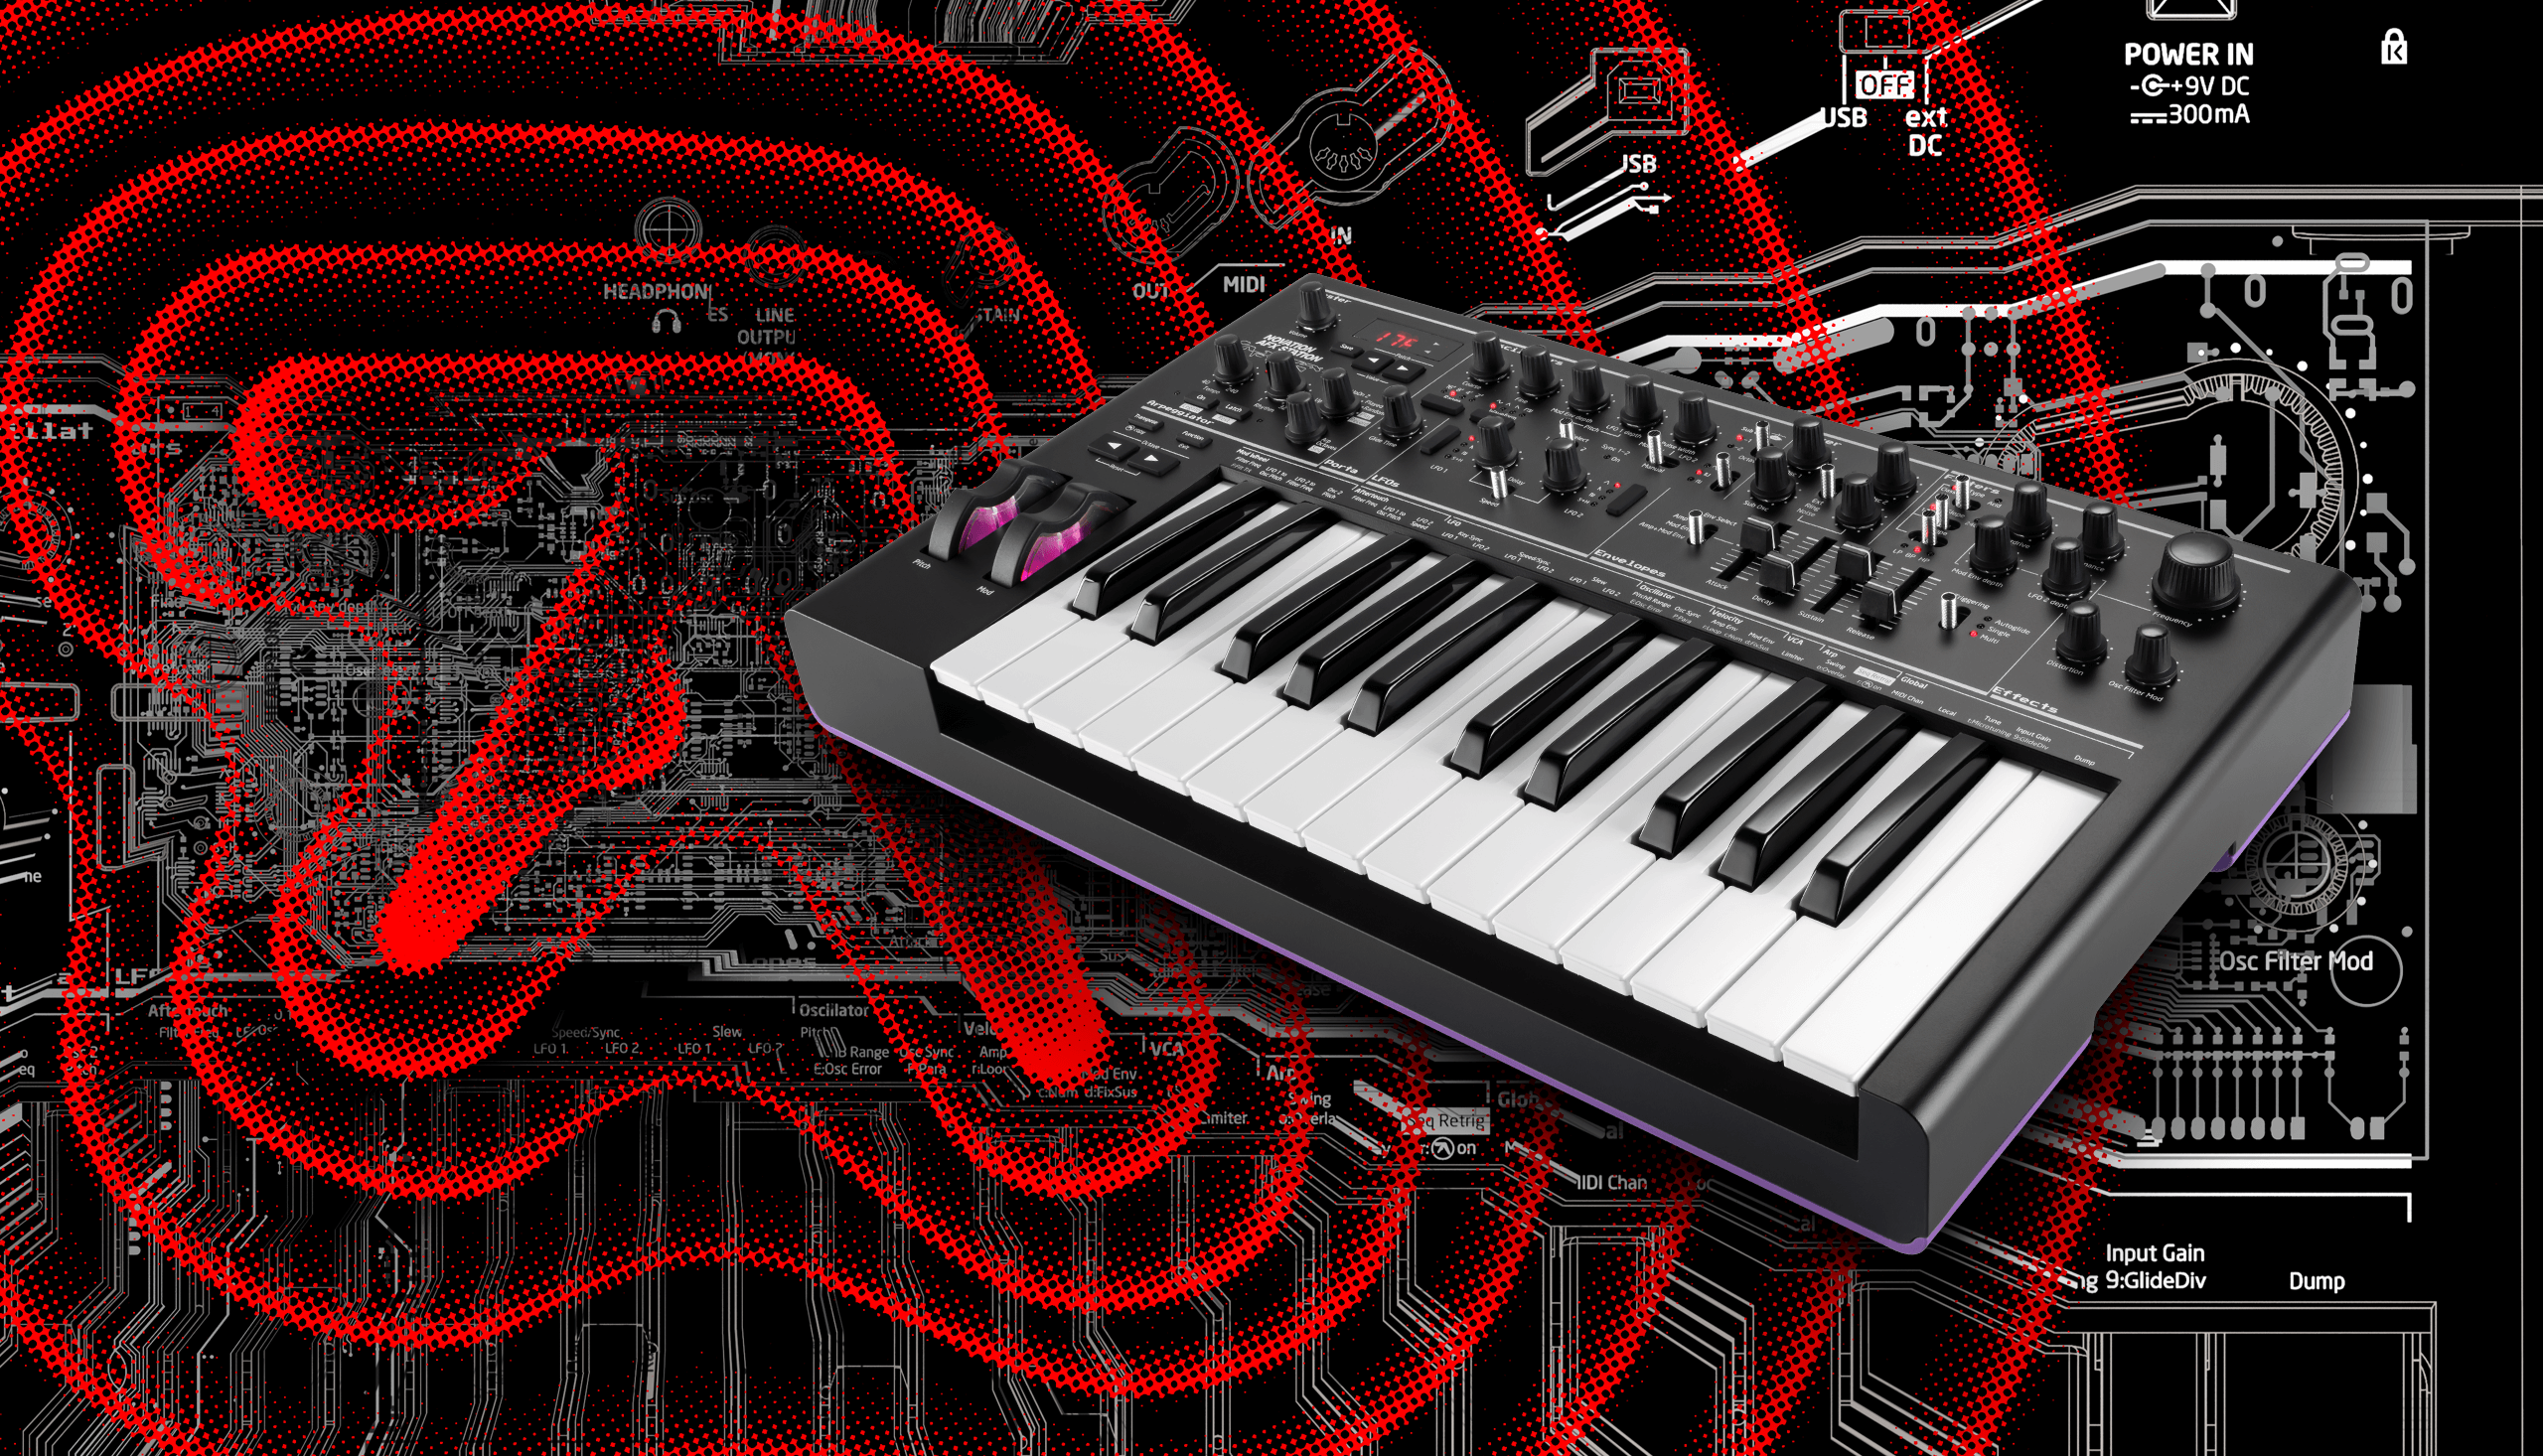 Get an Aphex Twin approved synth with Novation’s limited AFX Station